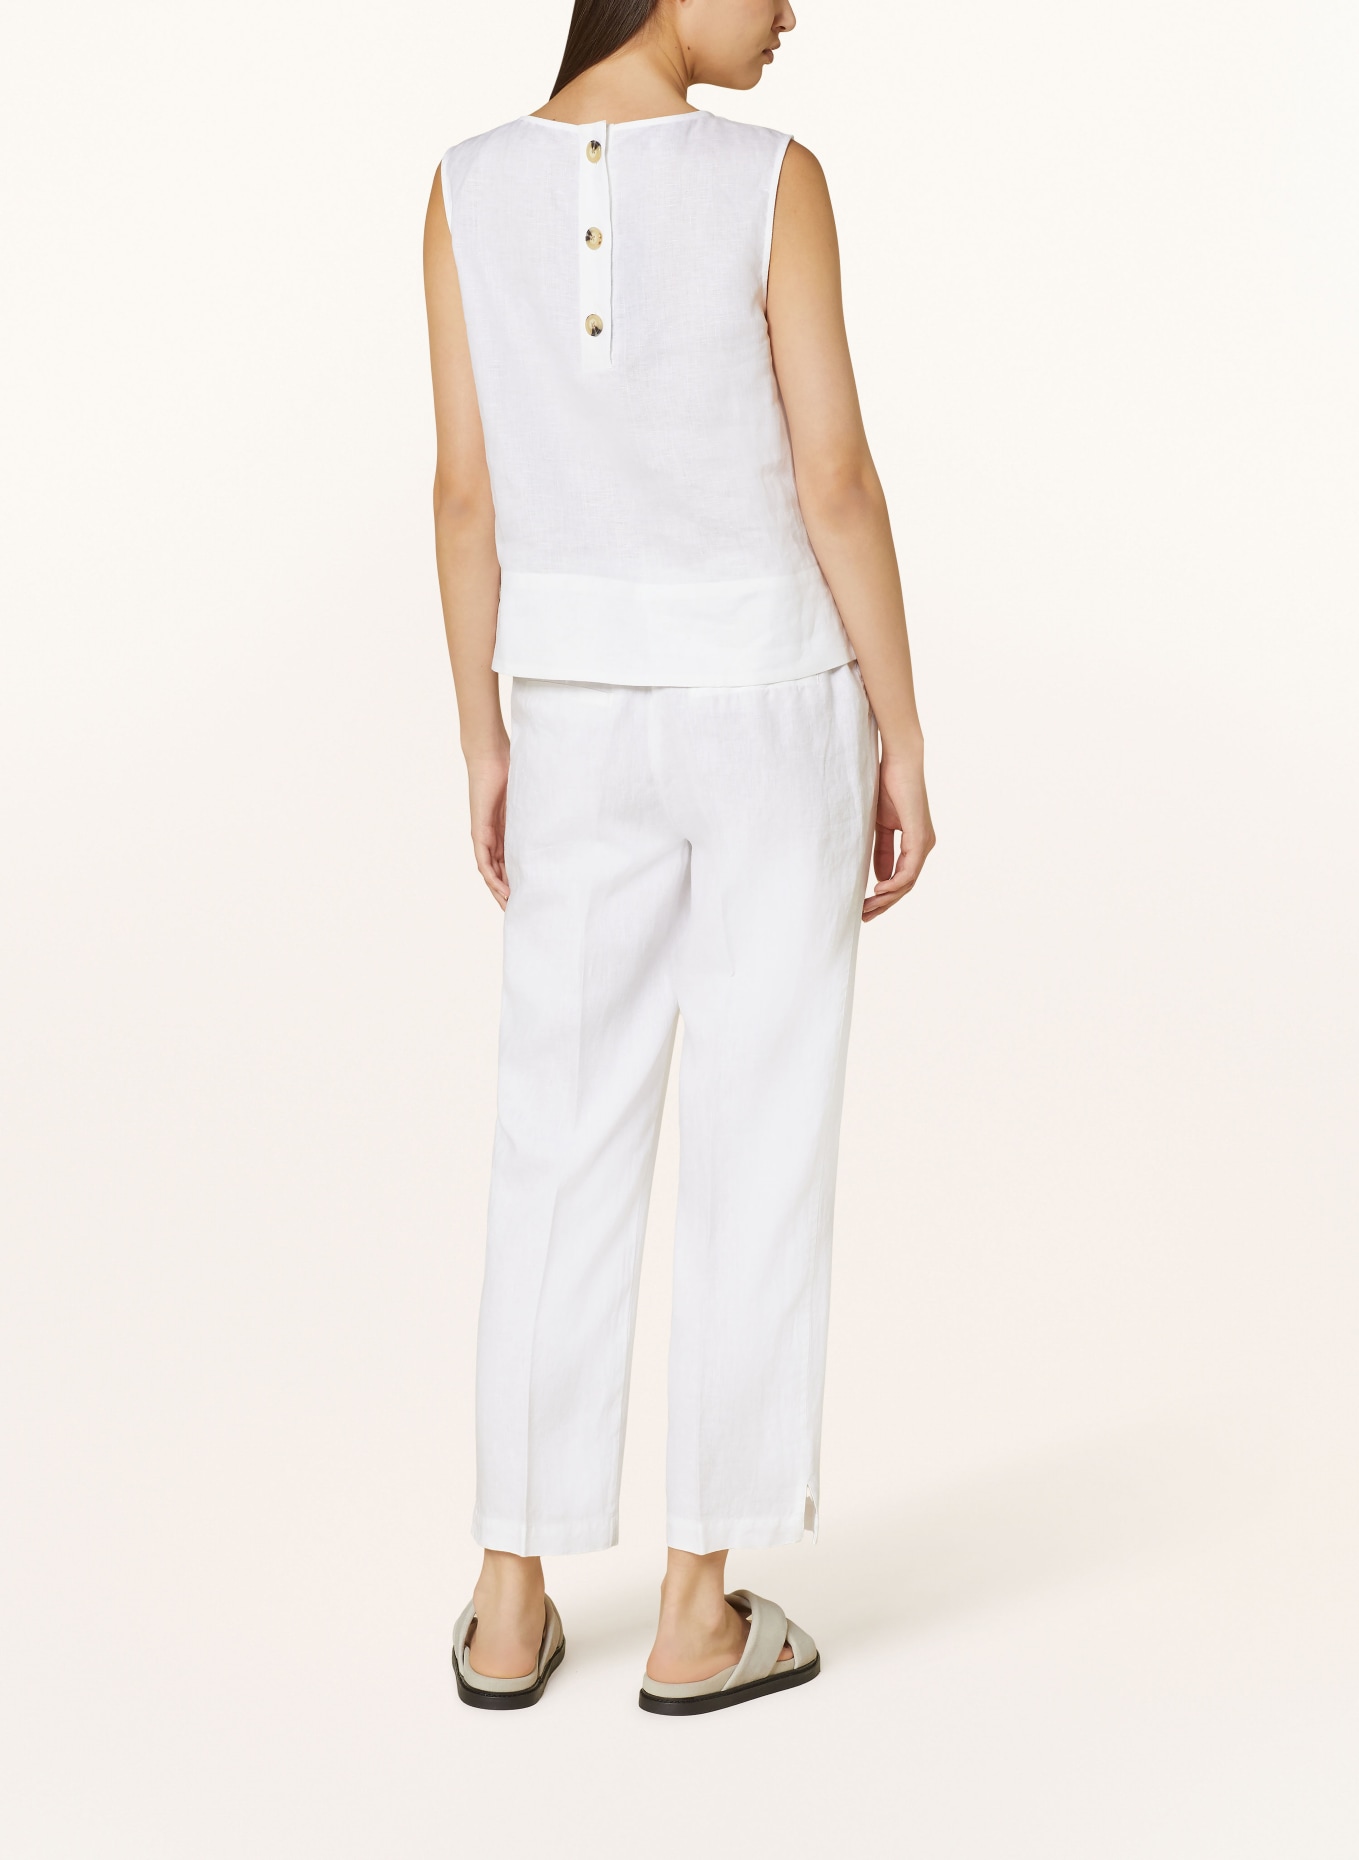 HOBBS Blouse top MALINDI in linen, Color: WHITE (Image 3)